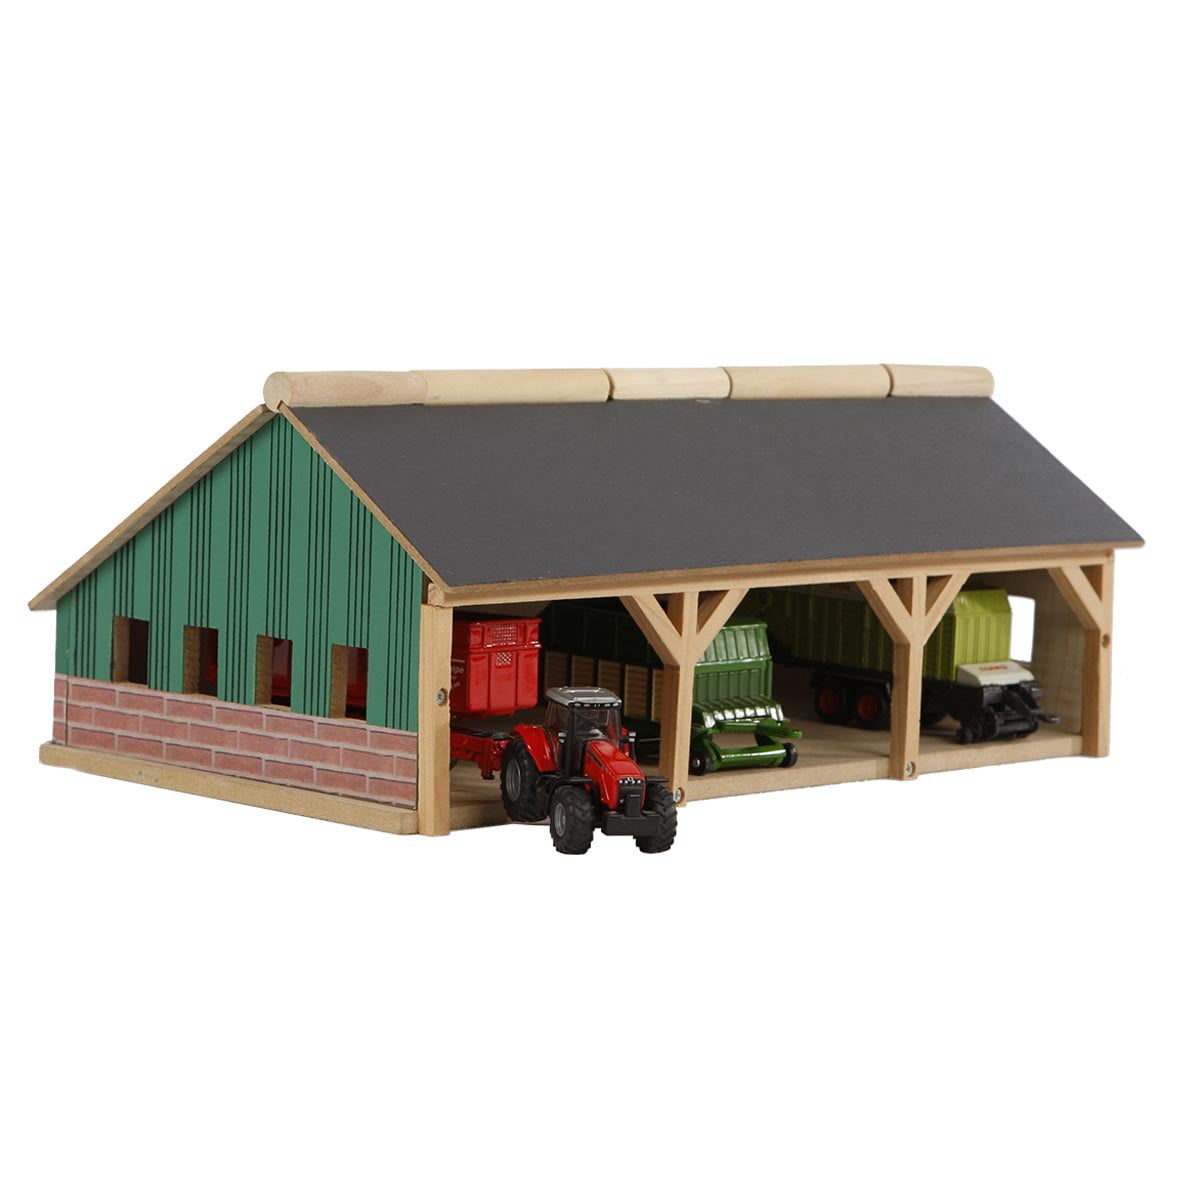 Ertl Farm Country tan slanted roof out building shed 1/64th scale 